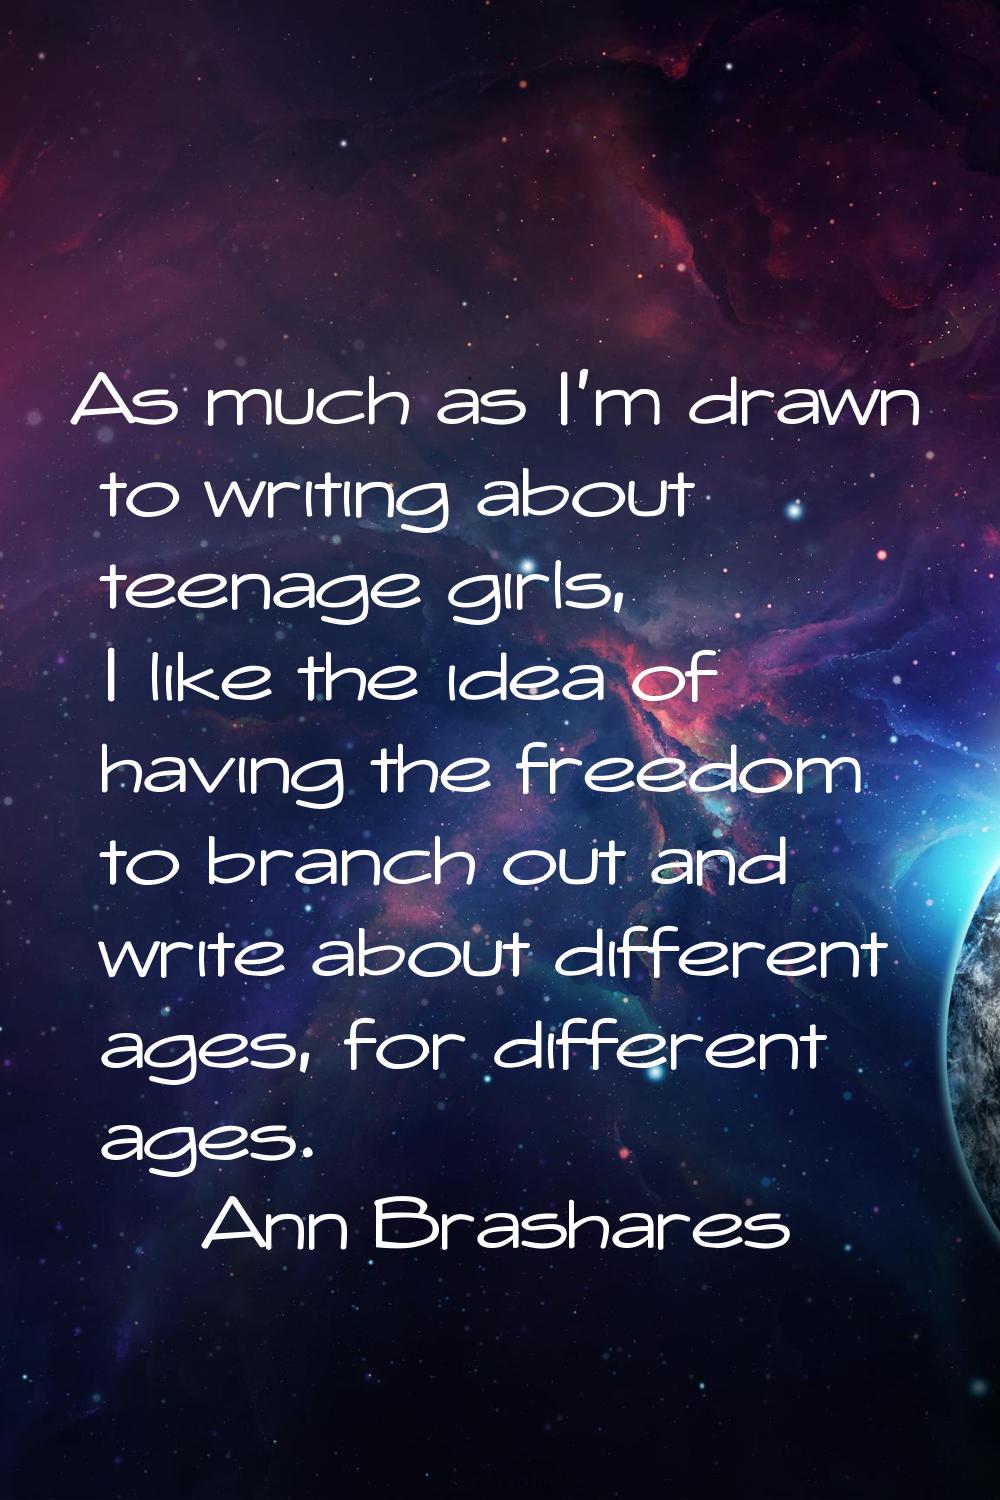 As much as I'm drawn to writing about teenage girls, I like the idea of having the freedom to branc